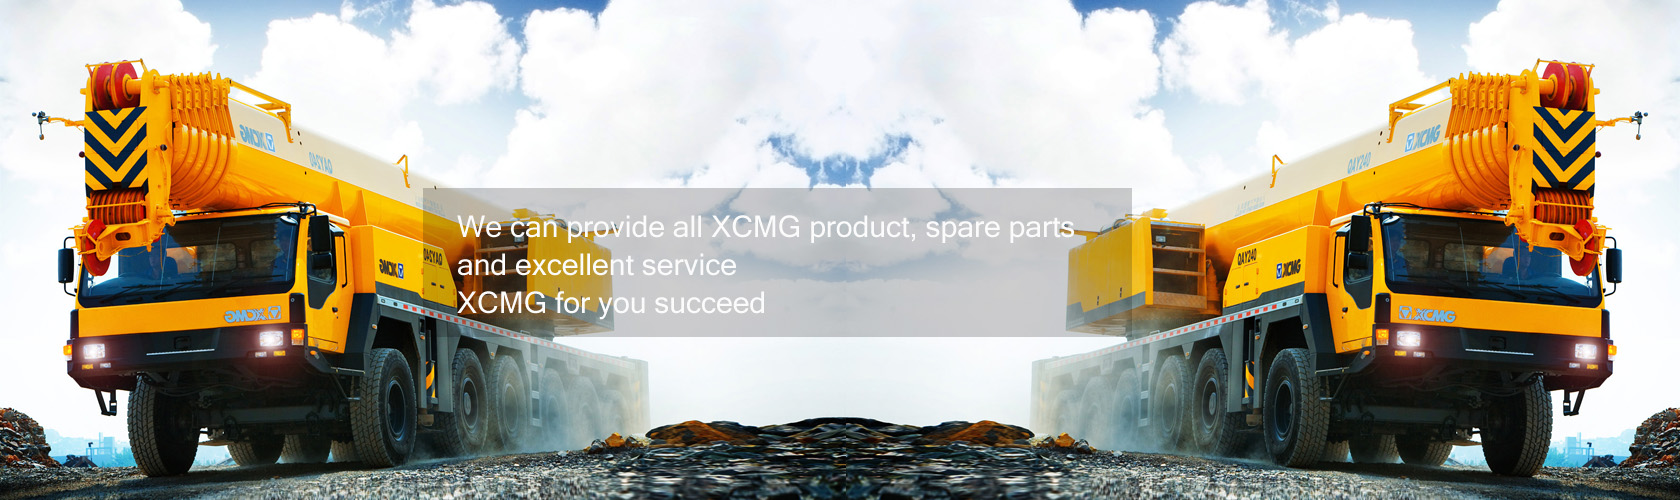 XCMG for your succeed